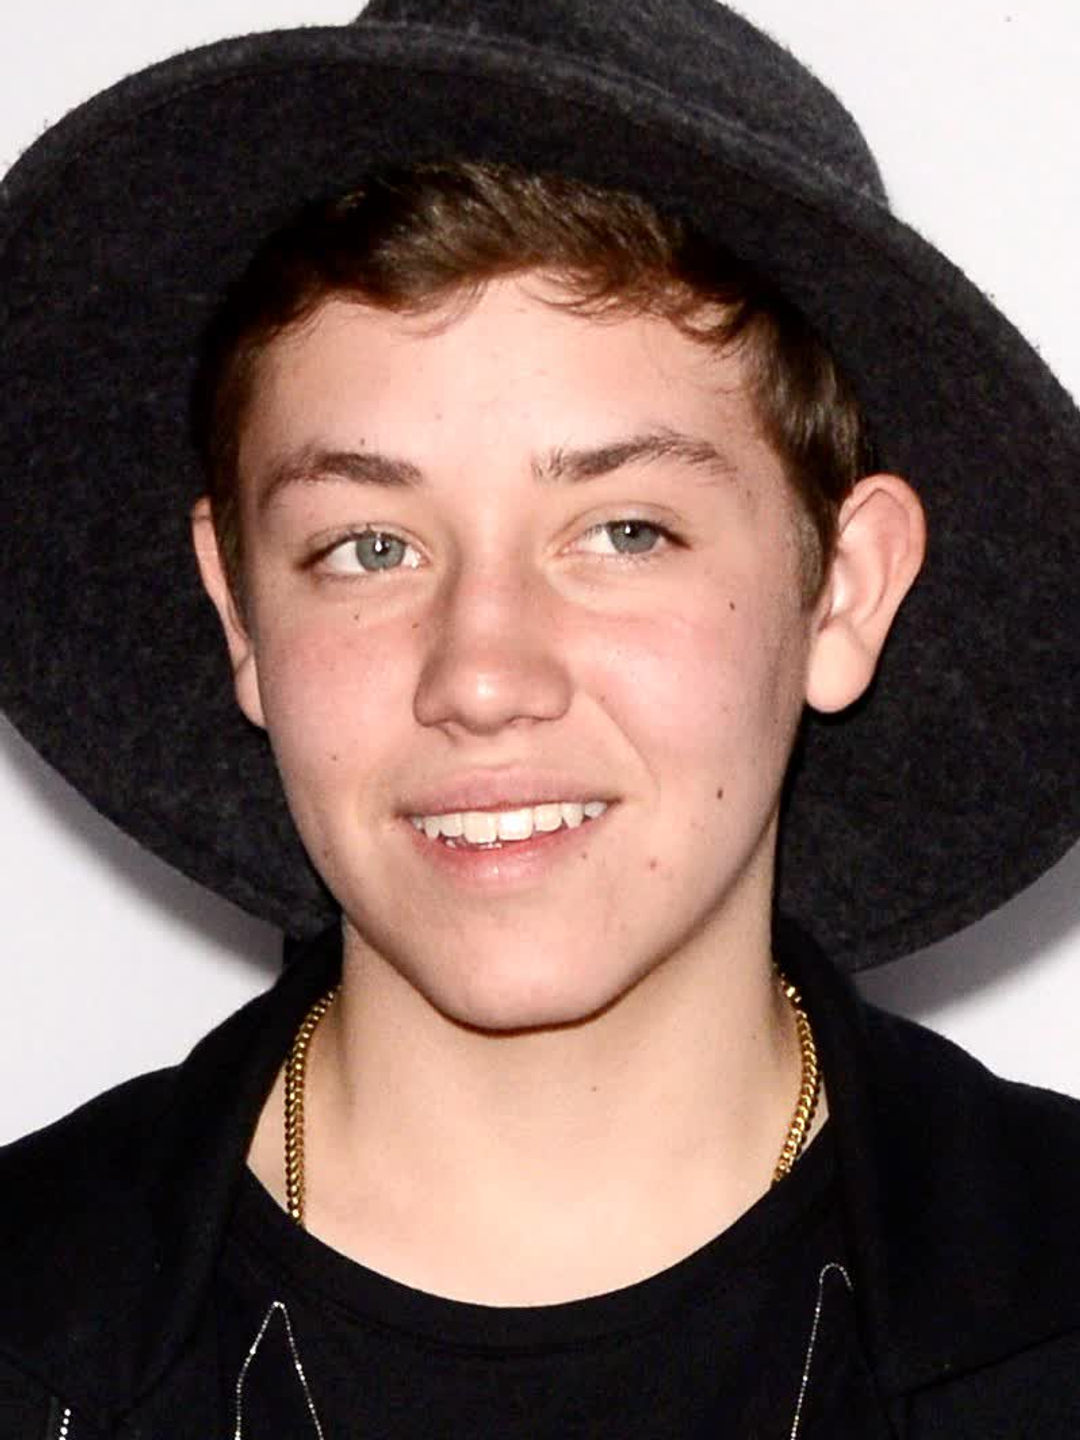 Ethan Cutkosky who is his mother